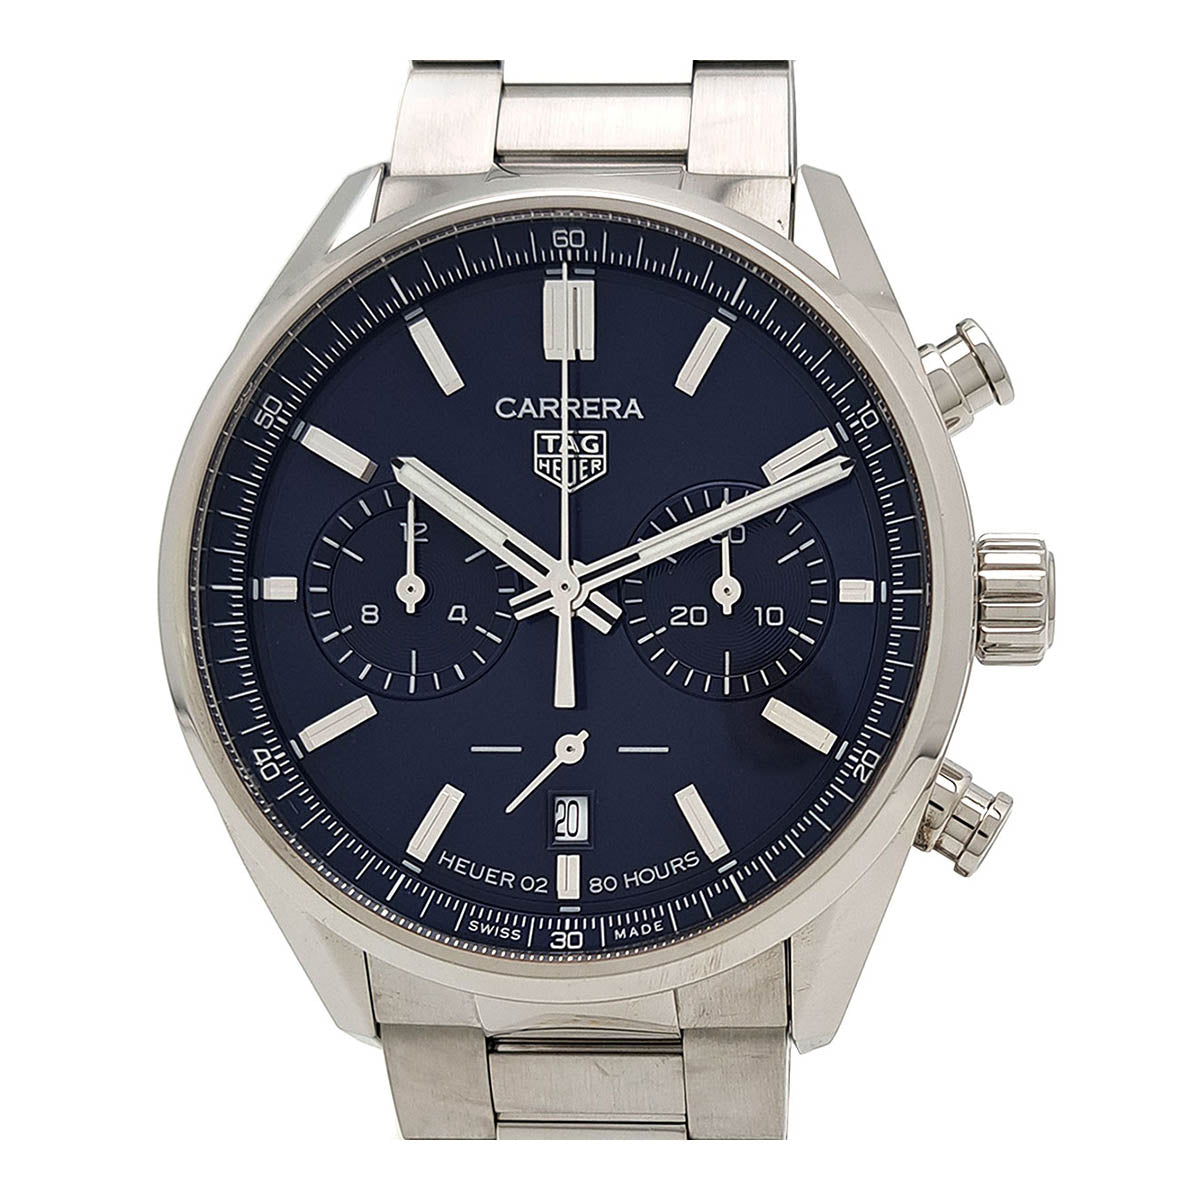 TAG HEUER Carrera Calibre Heuer 02 Chronograph CBN2011.BA0642 Automatic Stainless Steel Men’s Pre-owned Watch CBN2011.BA0642